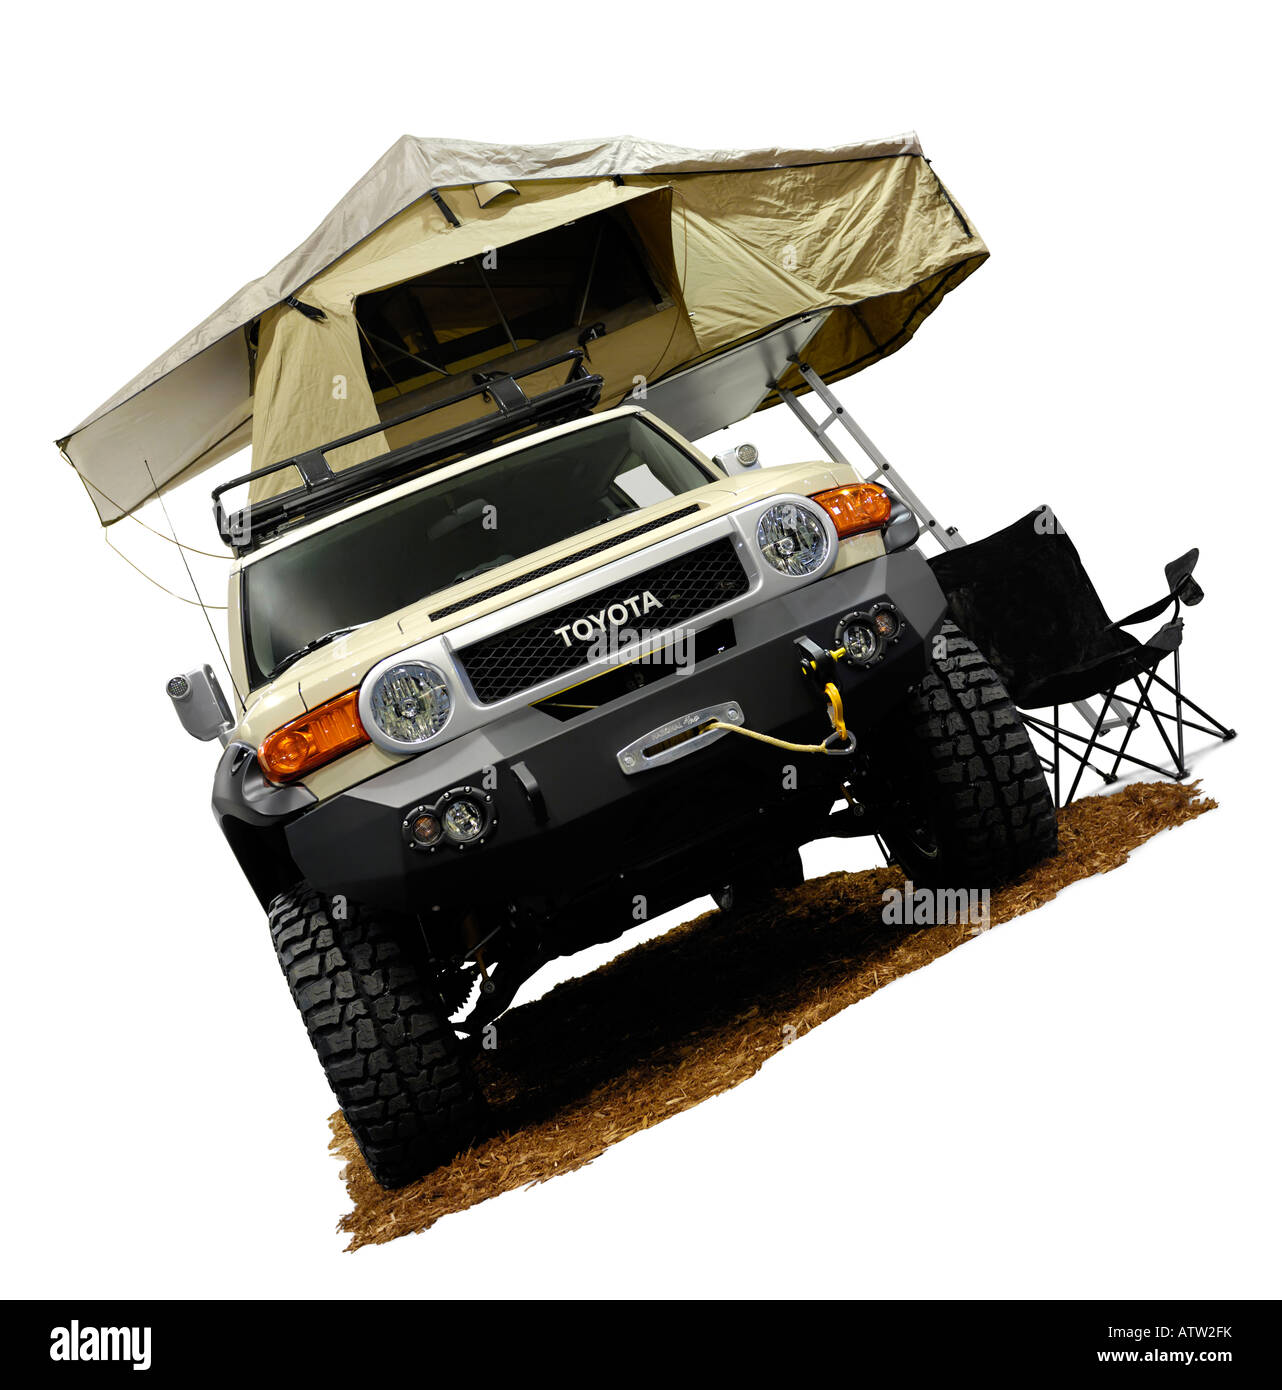 Toyota FJ Cruiser 2008 with a Tent Stock Photo